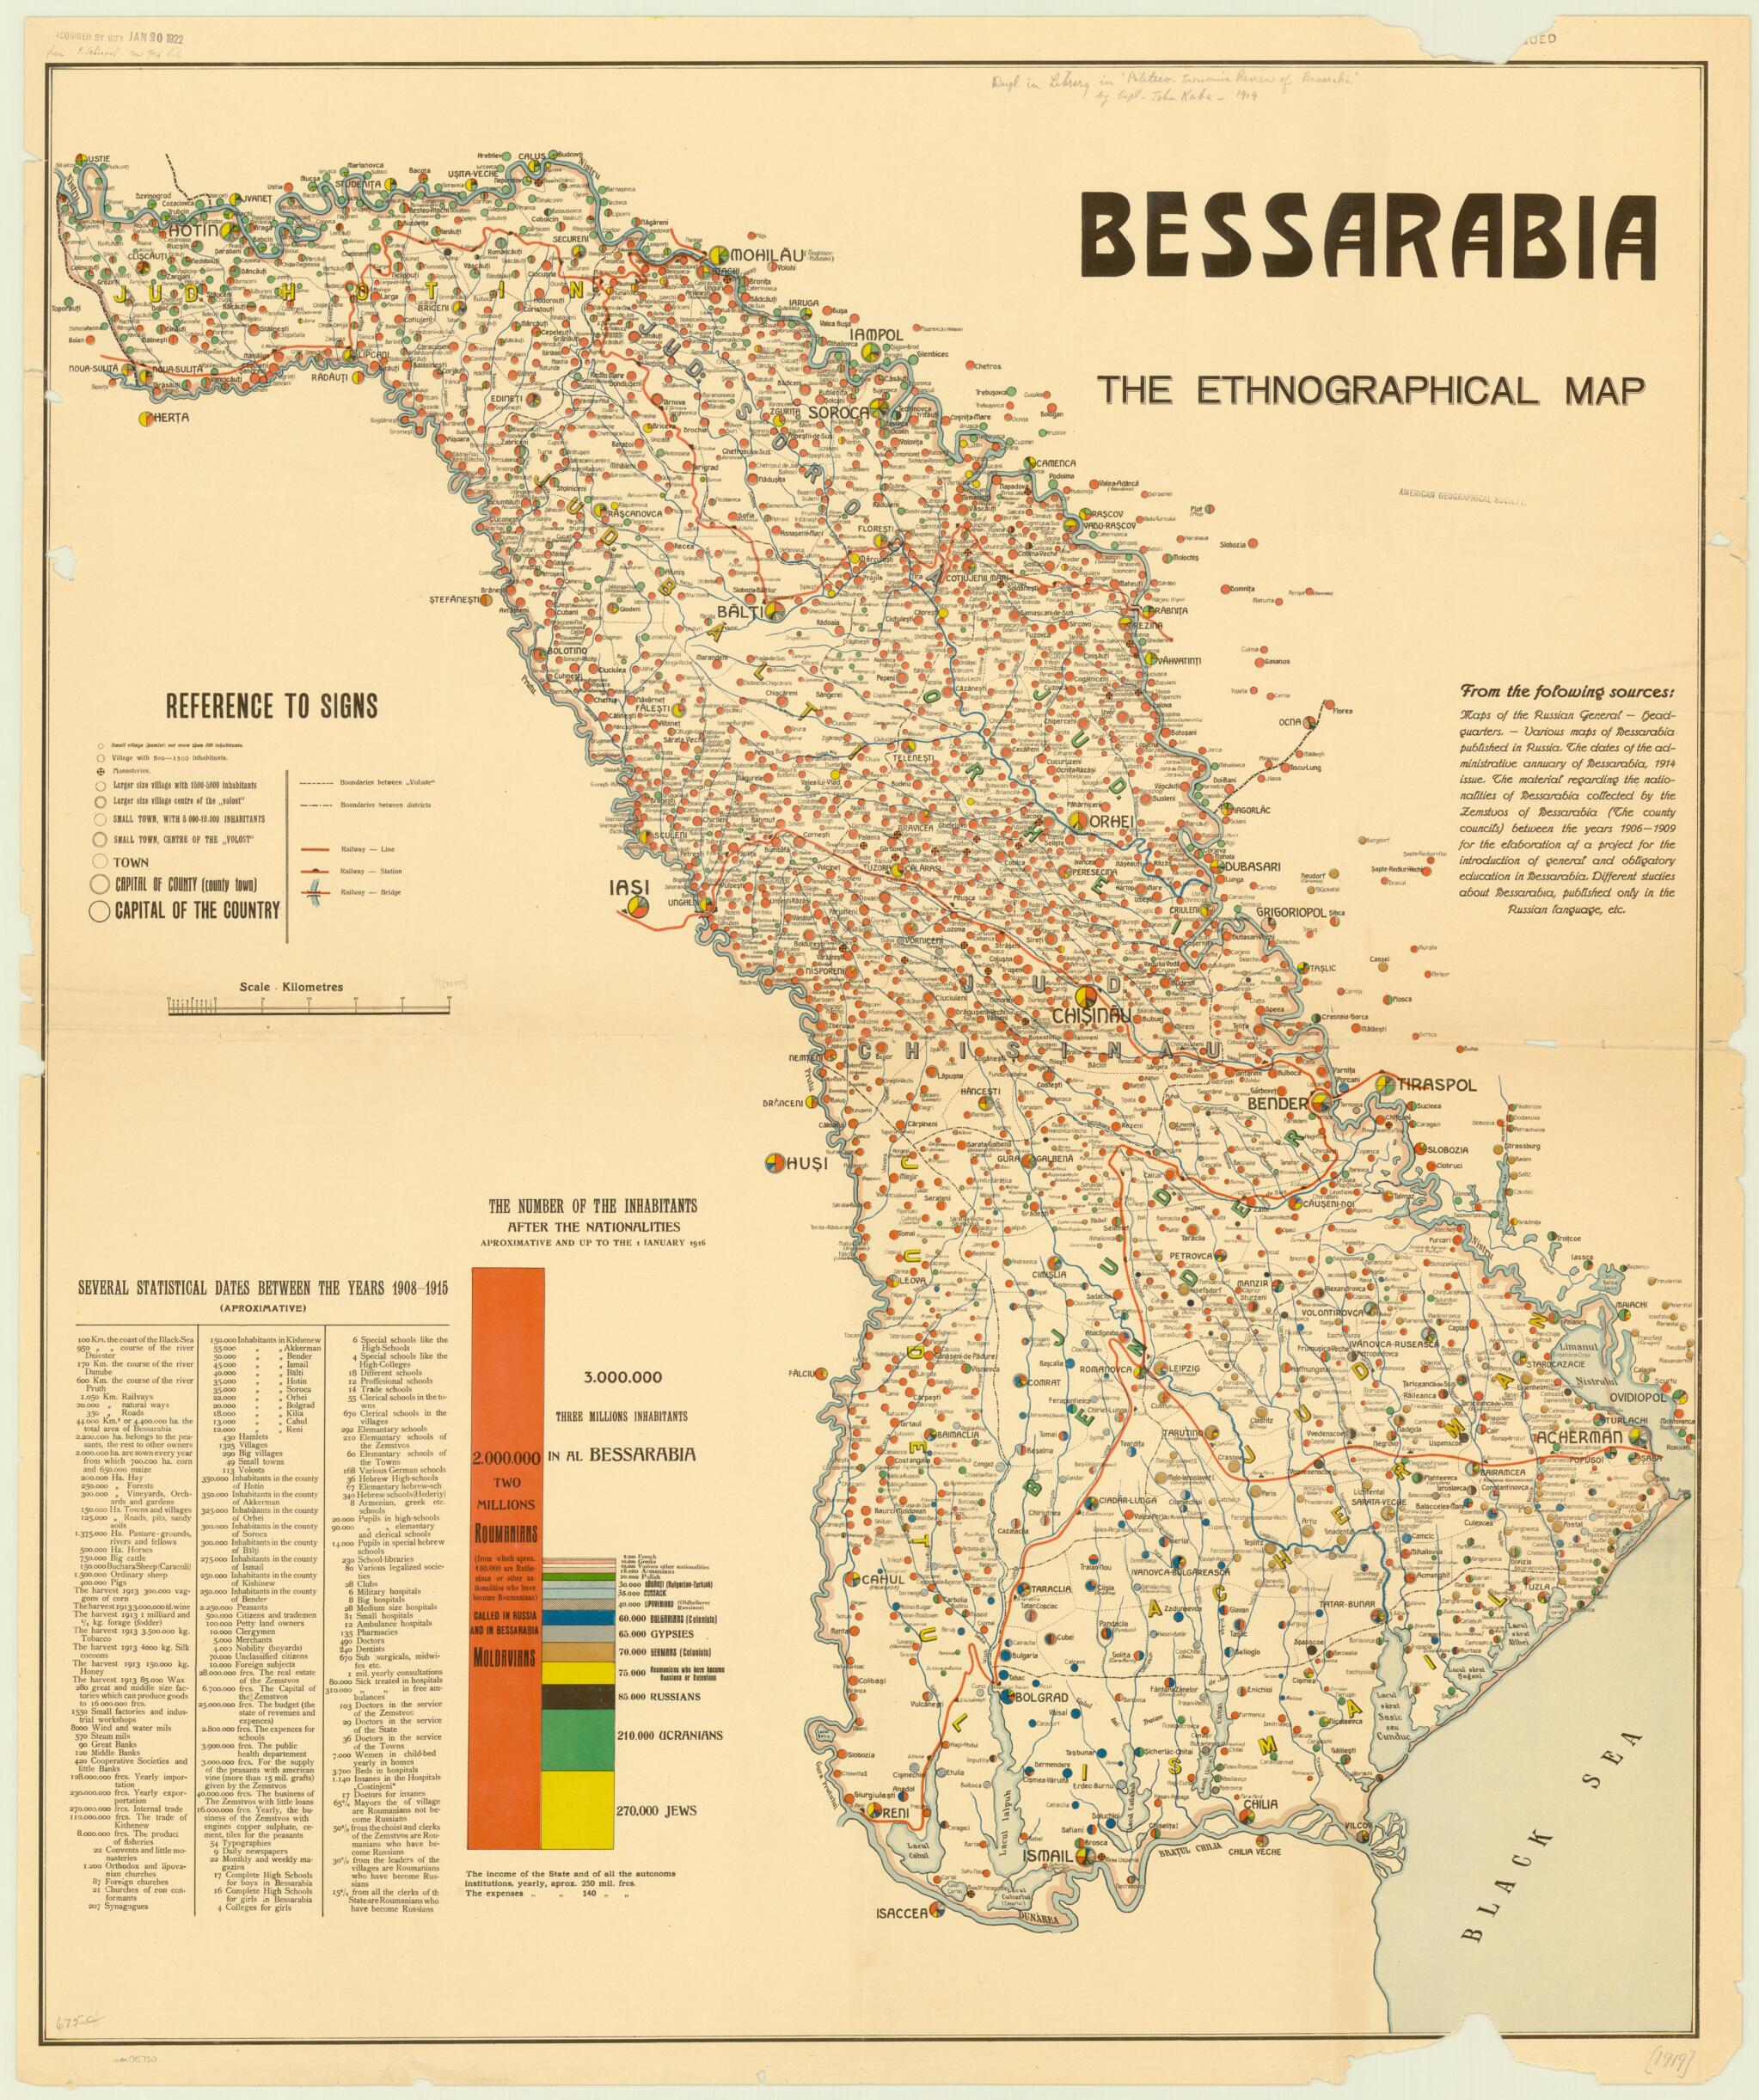 This old map of Bessarabia, the Ethnographical Map from 1919 was created by  American Relief Administration, John Kaba in 1919